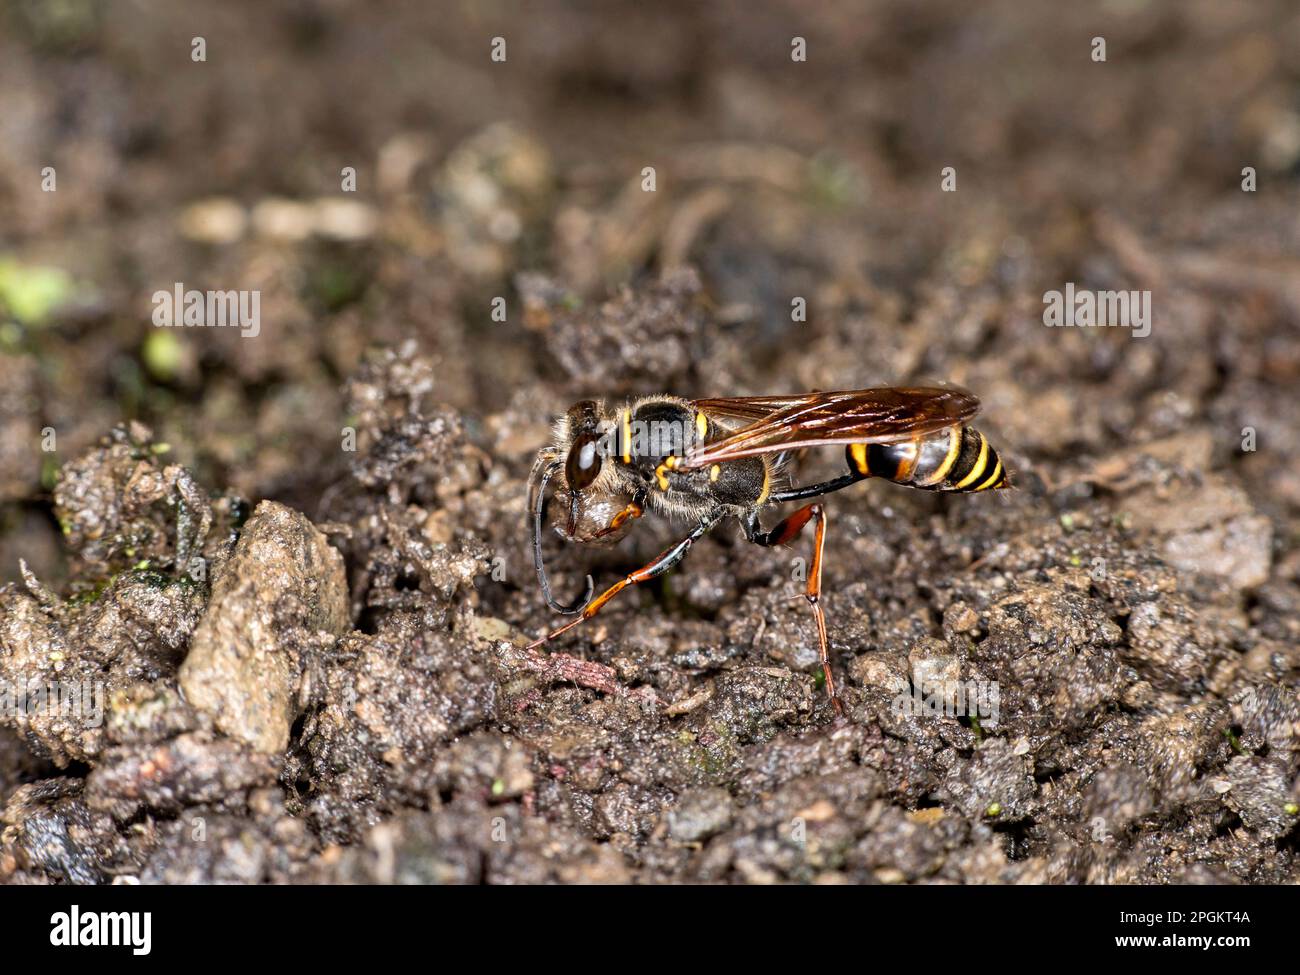 Asian mud-dauber wasp (Sceliphron curvatum) collecting mud for building brood cells, Ovronnaz, Valas, Switzerland Stock Photo